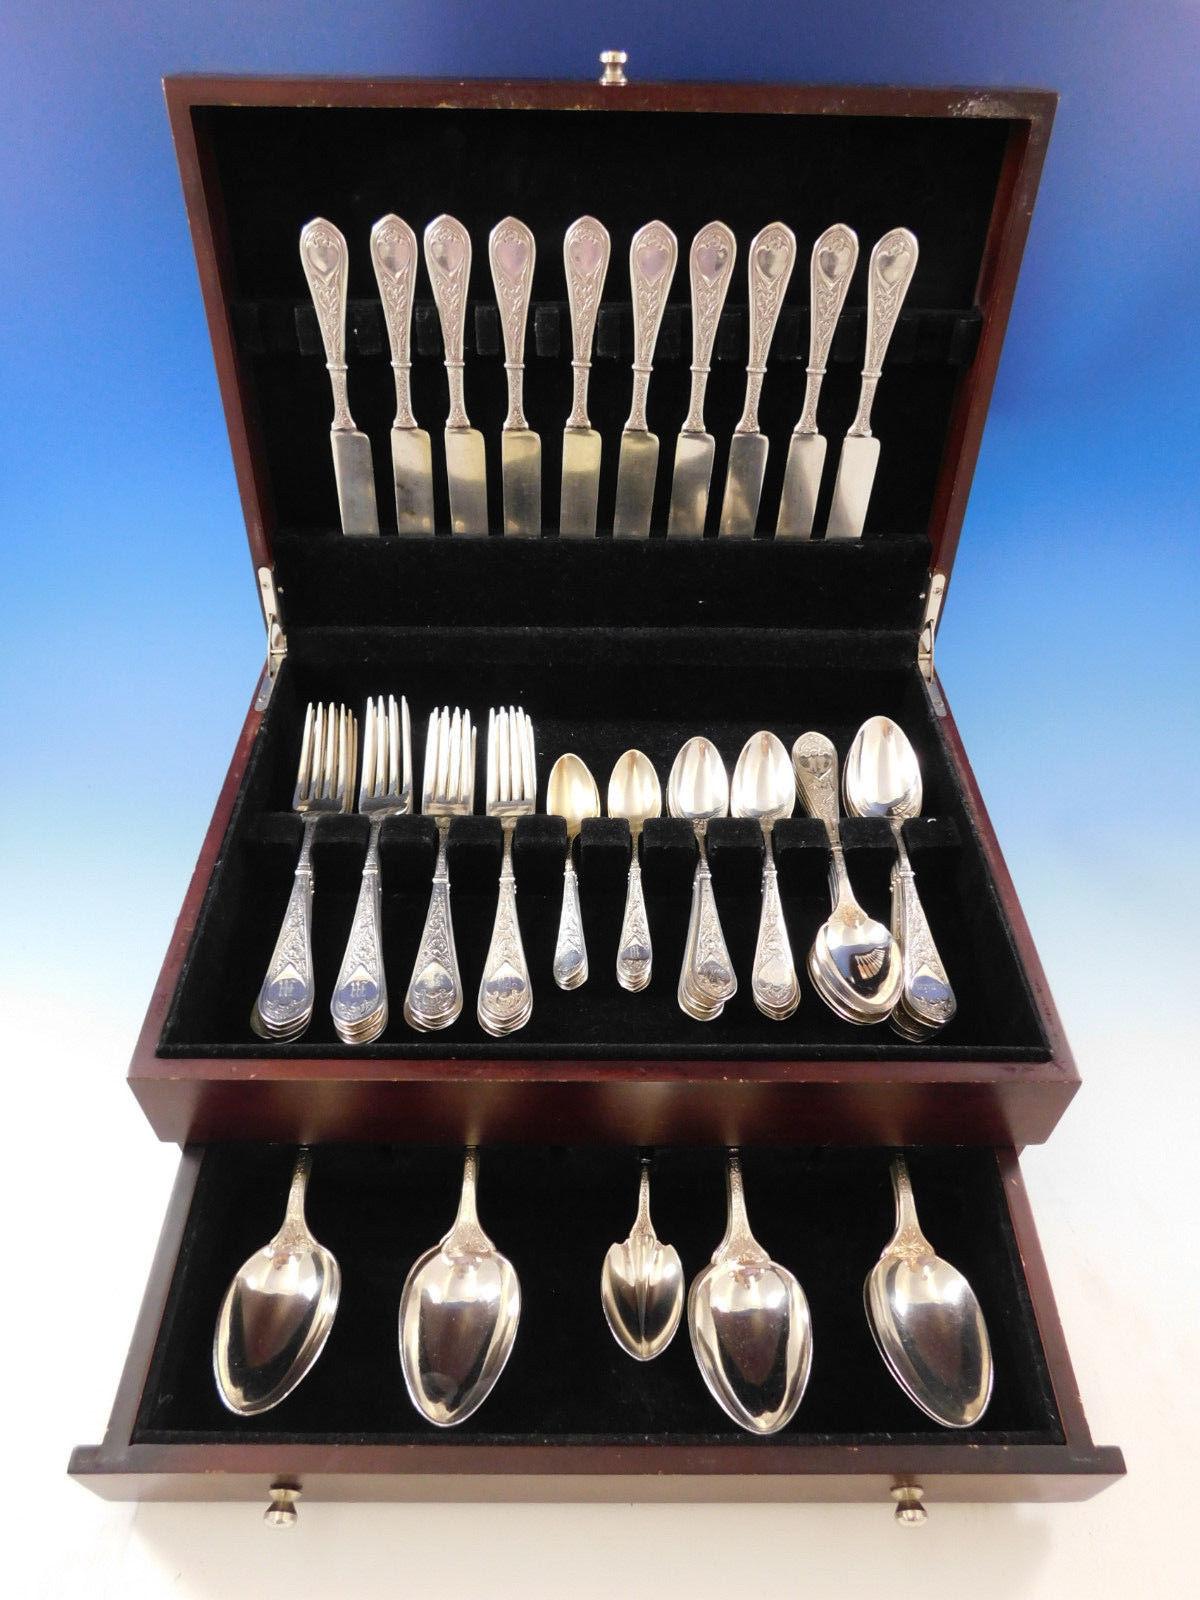 Raphael by Gorham sterling silver flatware set 71 pieces. This set includes:

Ten flat handle all-sterling tea knives, 8 3/8